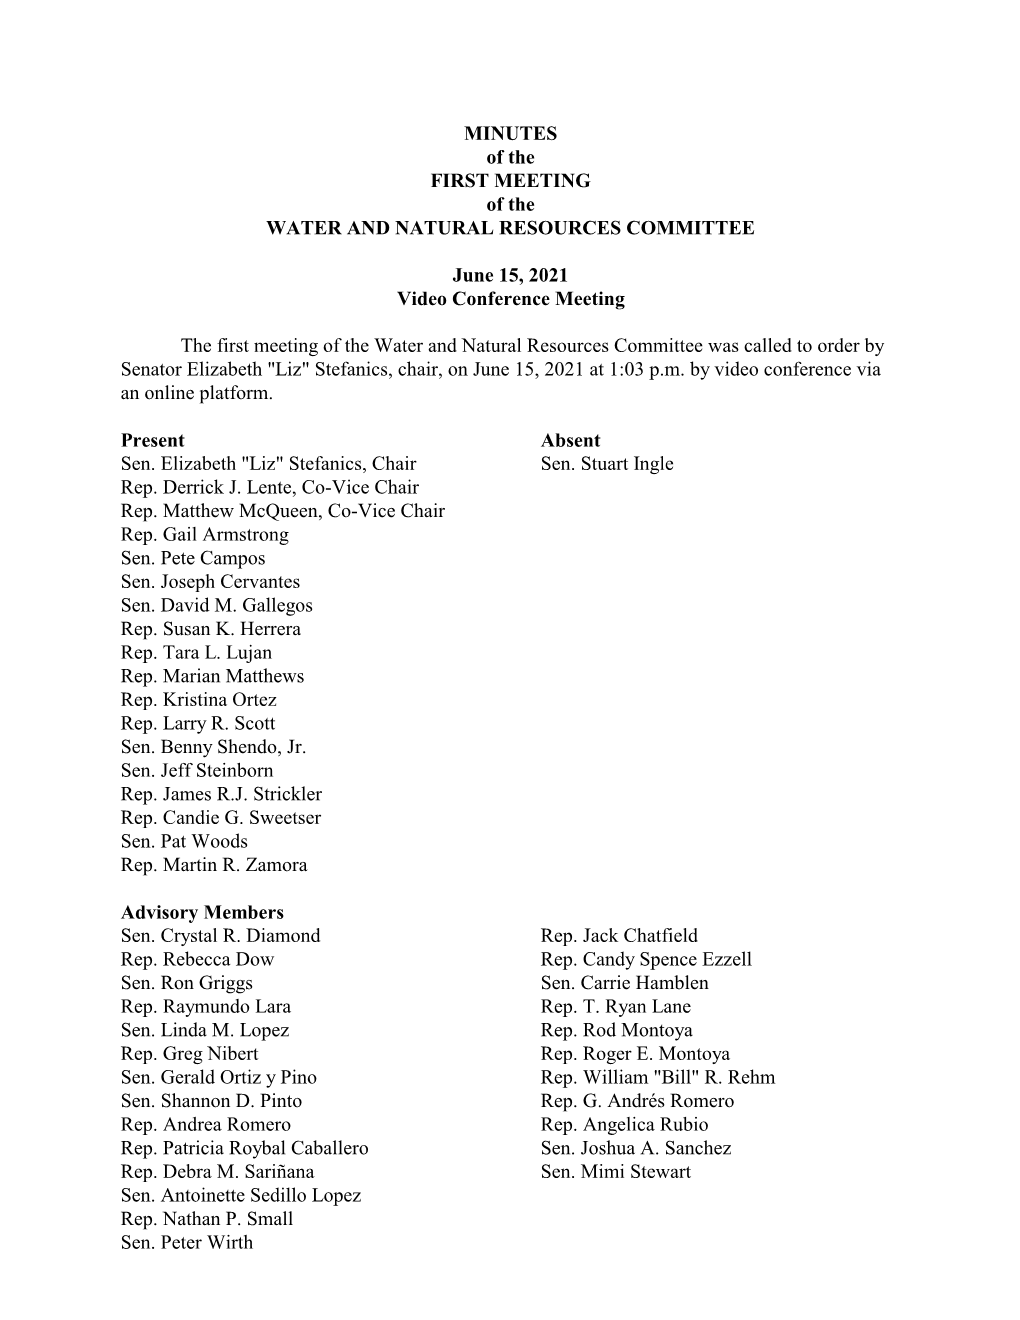 MINUTES of the FIRST MEETING of the WATER and NATURAL RESOURCES COMMITTEE